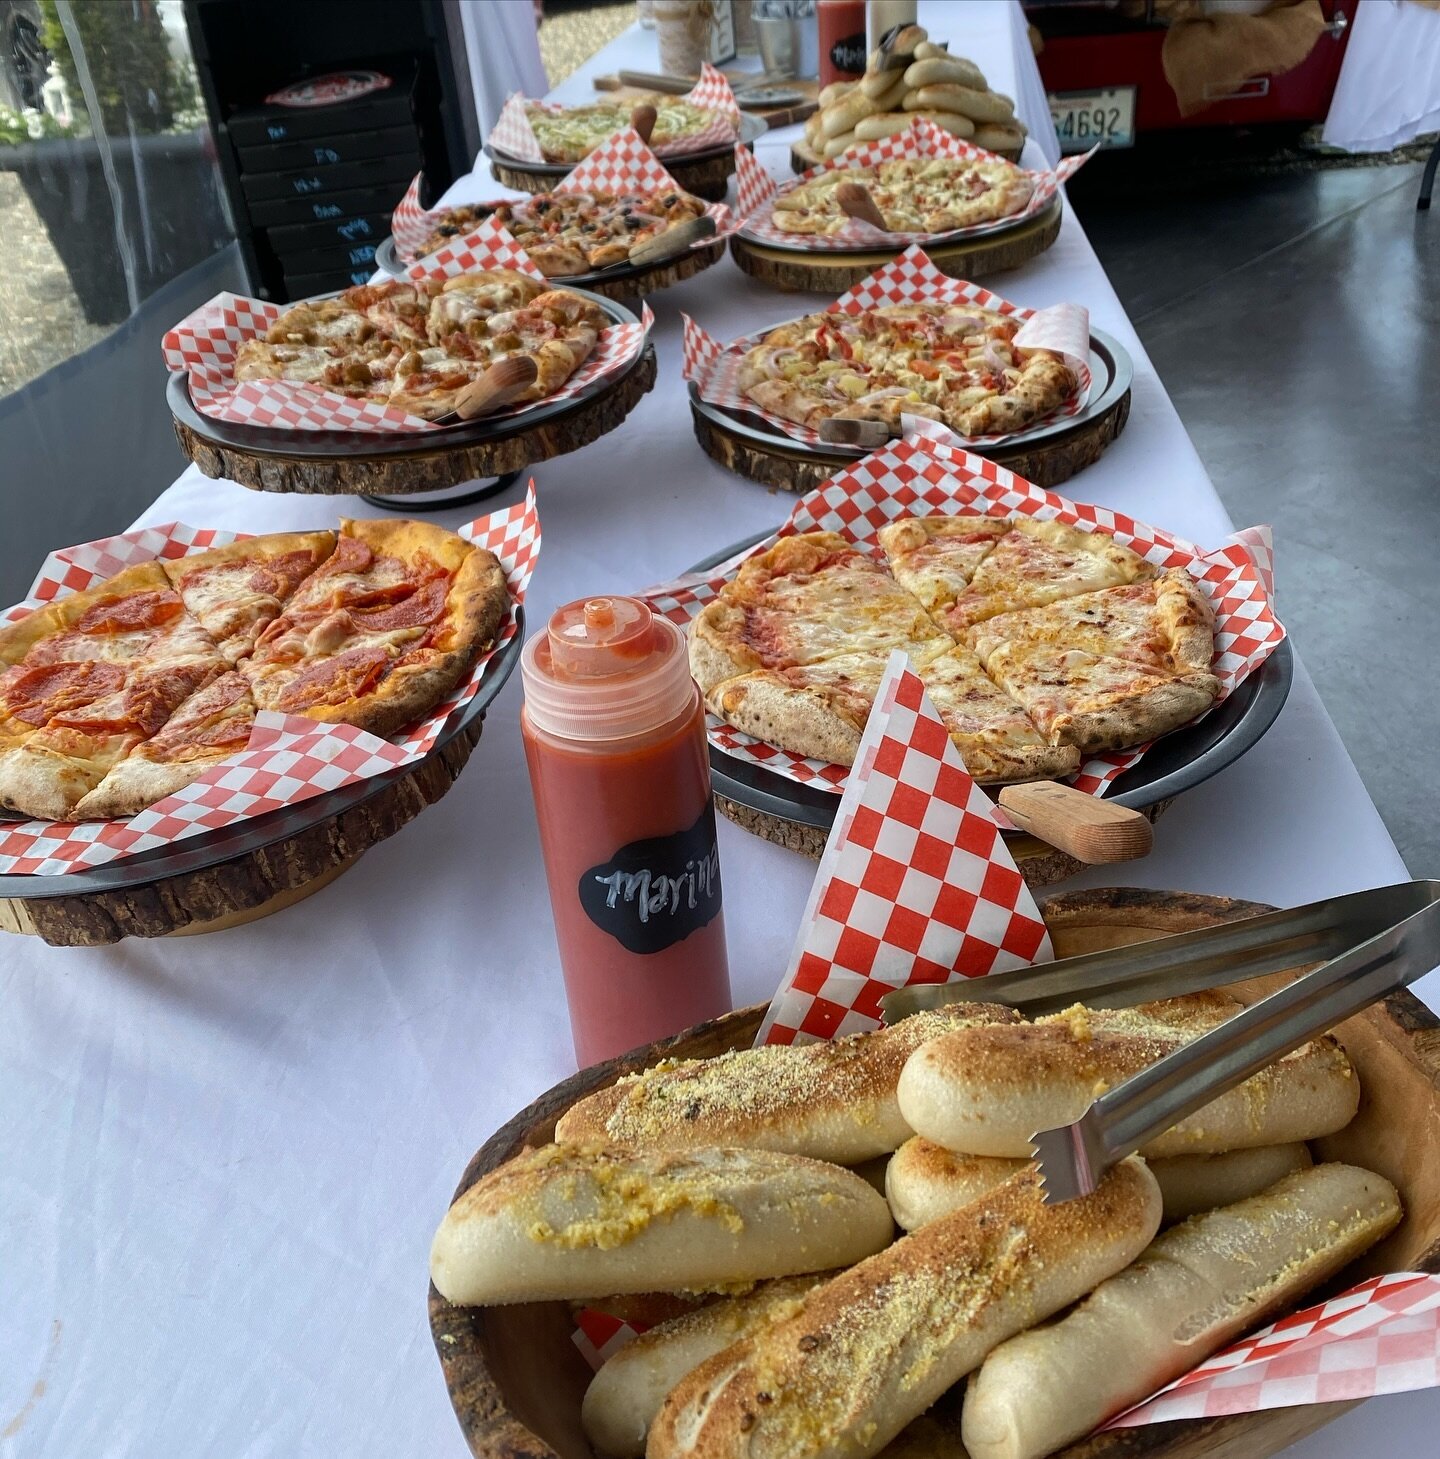 Does an #endless #pizzabuffet sound too good to be true? Let us make you #believers! Hire us for your next event! 

fatzachspizza.com
.
.
.
.
#eatlocal #smallbusiness #downtown #smallbusiness #puyallup #pnw #pizza #yummy #instagood  #food #foodporn #